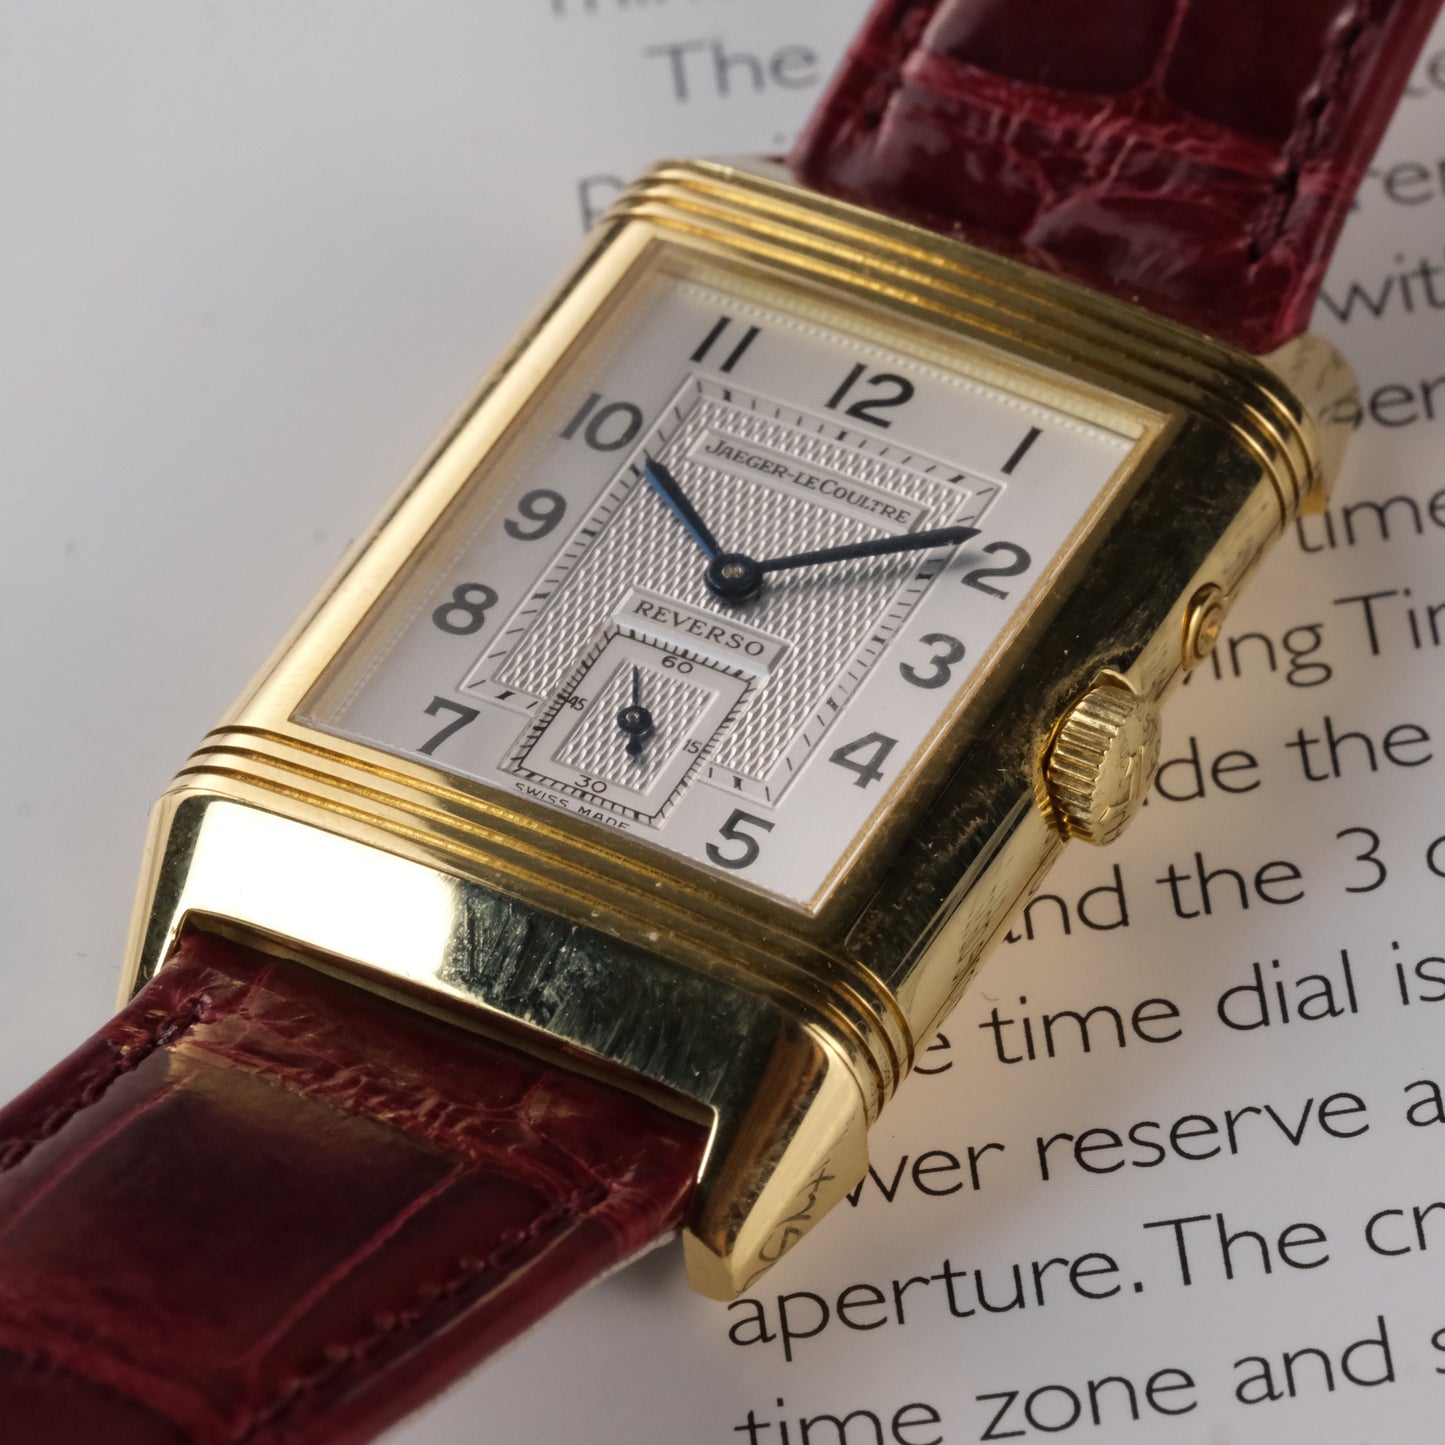 2000's Jaeger-LeCoultre Reverso Duo Serie Premier Ref. 270.1.54 Red Japan Edition (one of 39 made)